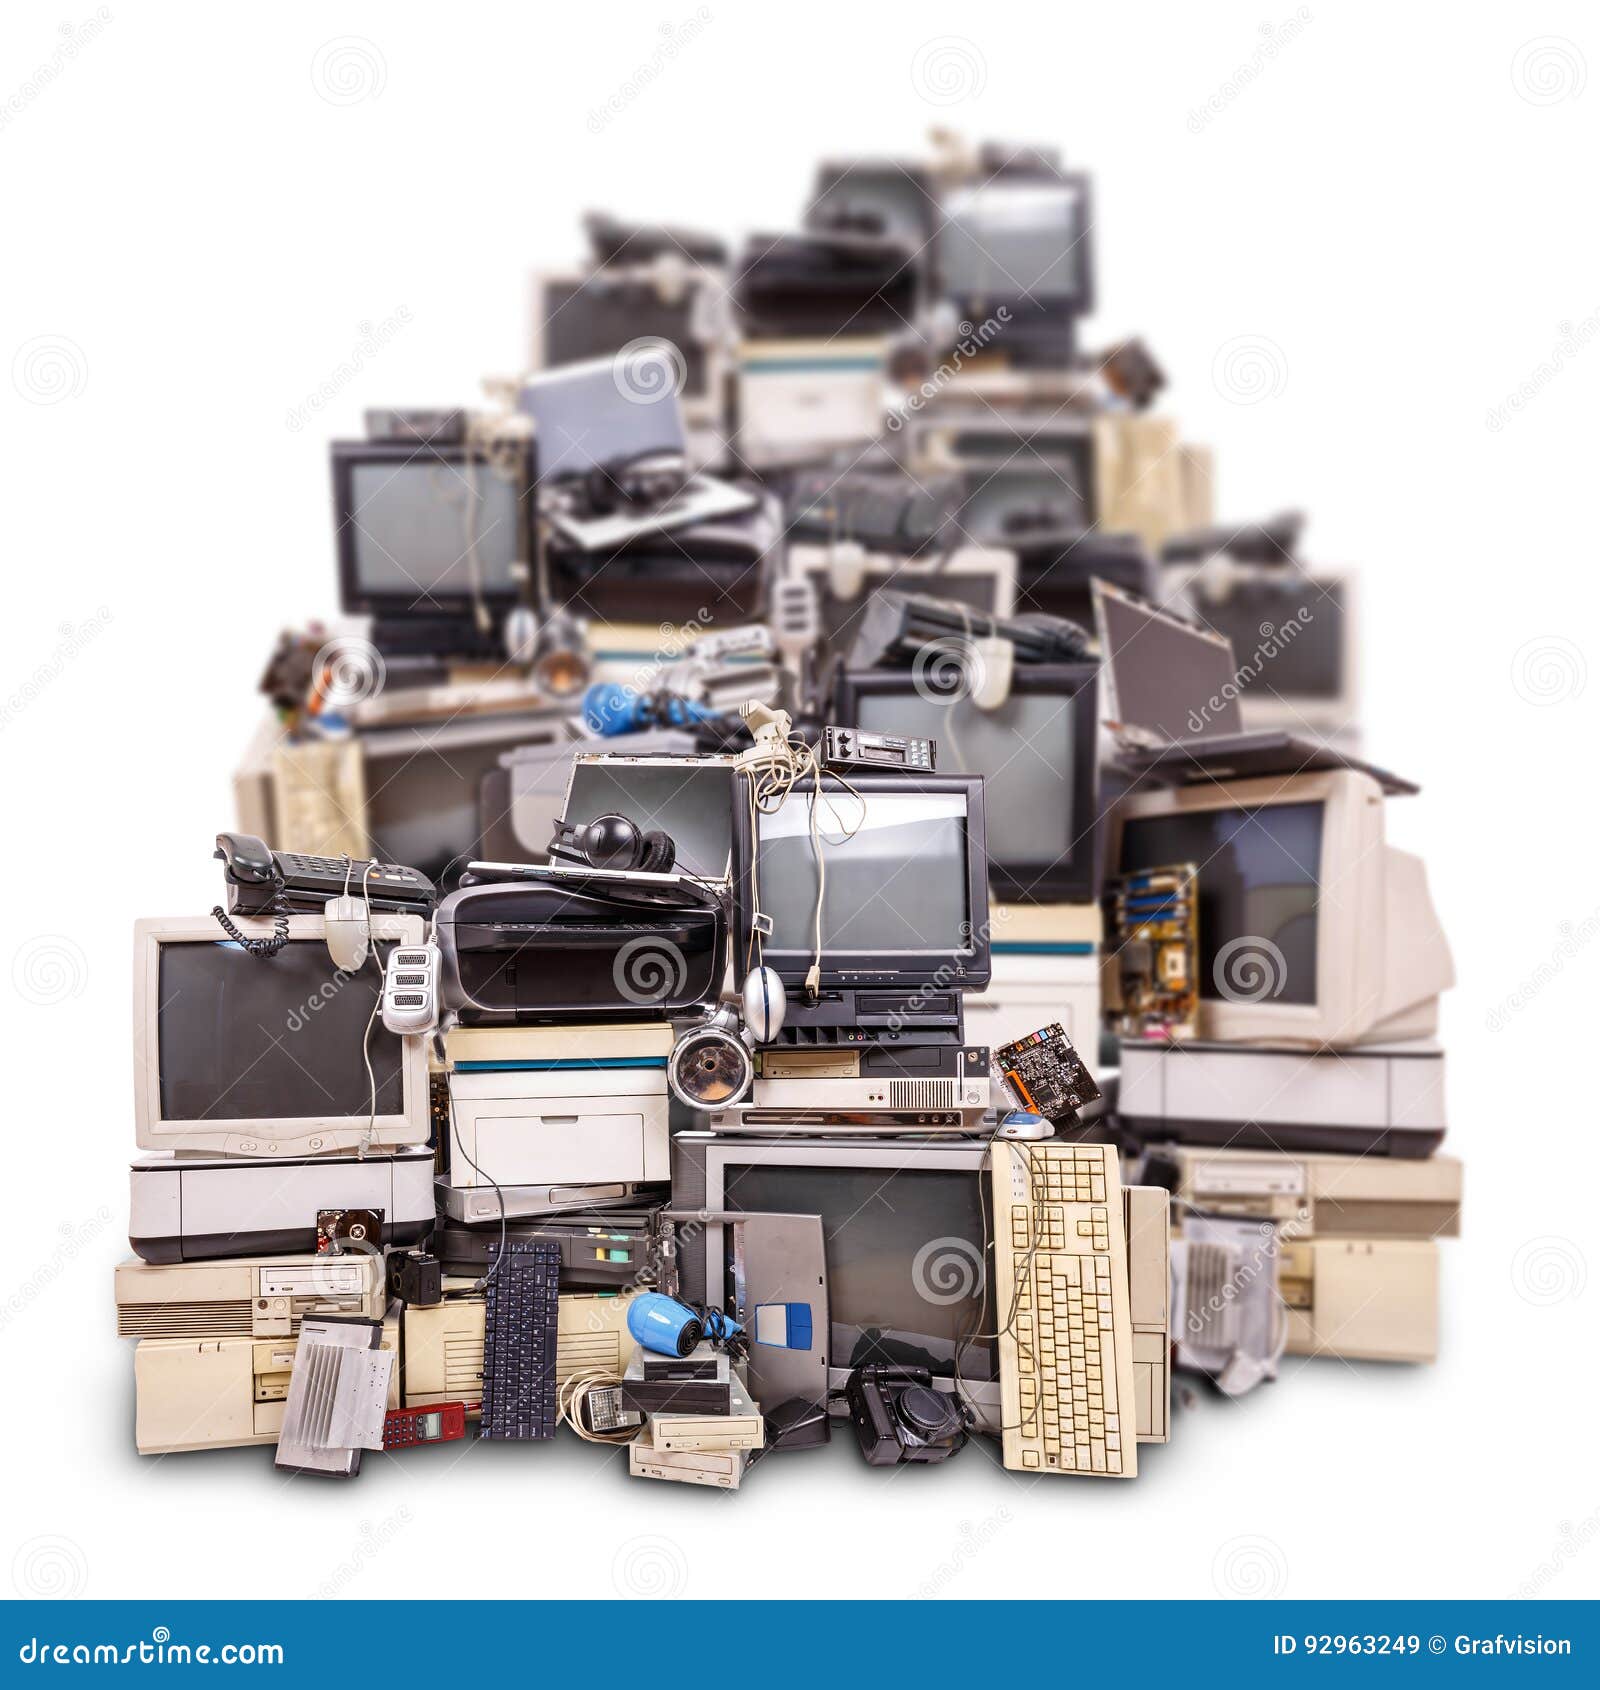 electronic waste ready for recycling